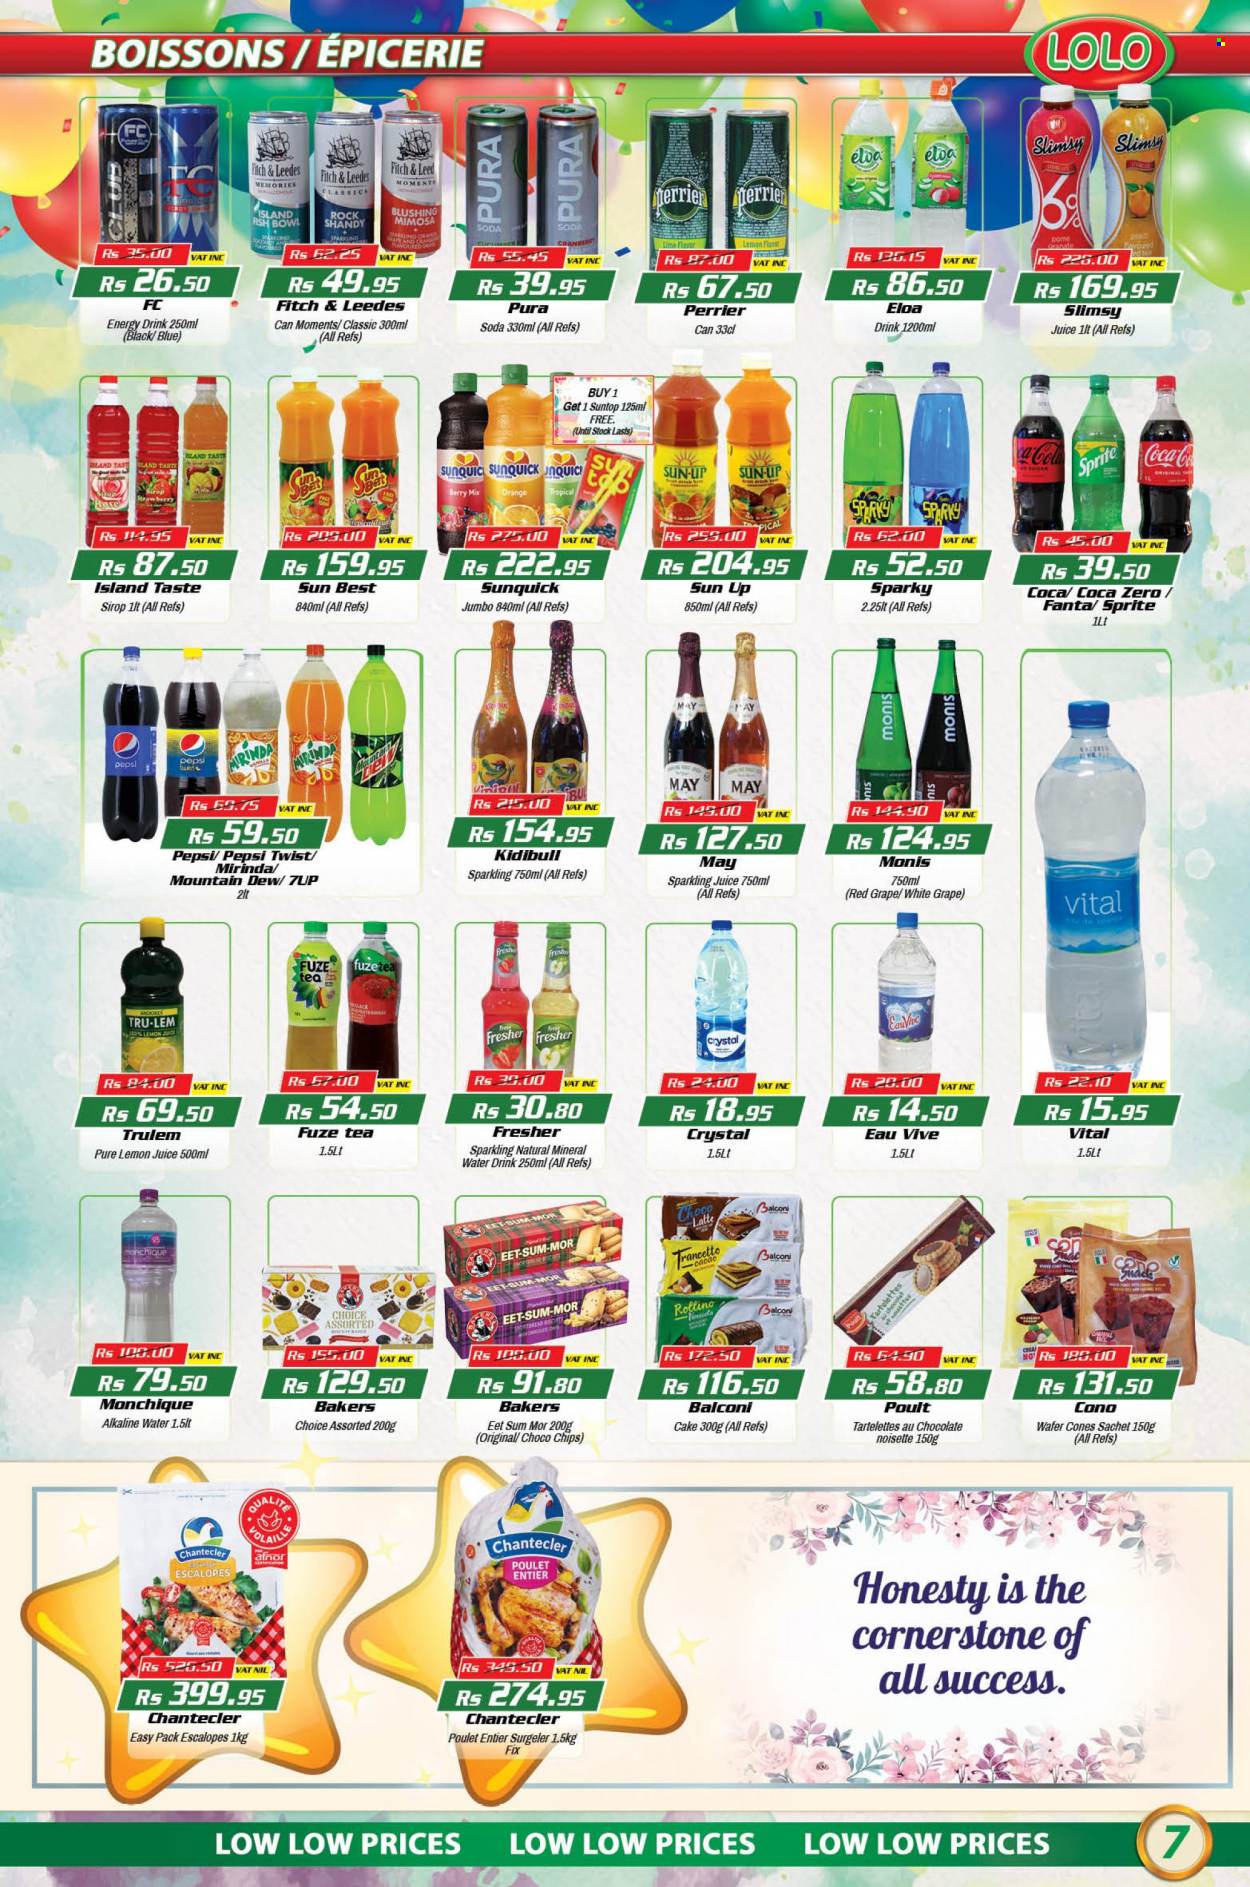 thumbnail - LOLO Hyper Catalogue - 26.07.2022 - 16.08.2022 - Sales products - cake, oranges, fish, wafers, chocolate, biscuit, Mountain Dew, Sprite, Pepsi, Fanta, energy drink, 7UP, sparkling juice, Perrier, mineral water, soda, alkaline water, lemon juice, tea, rosé wine, bowl, Moments, Bakers, rose. Page 7.